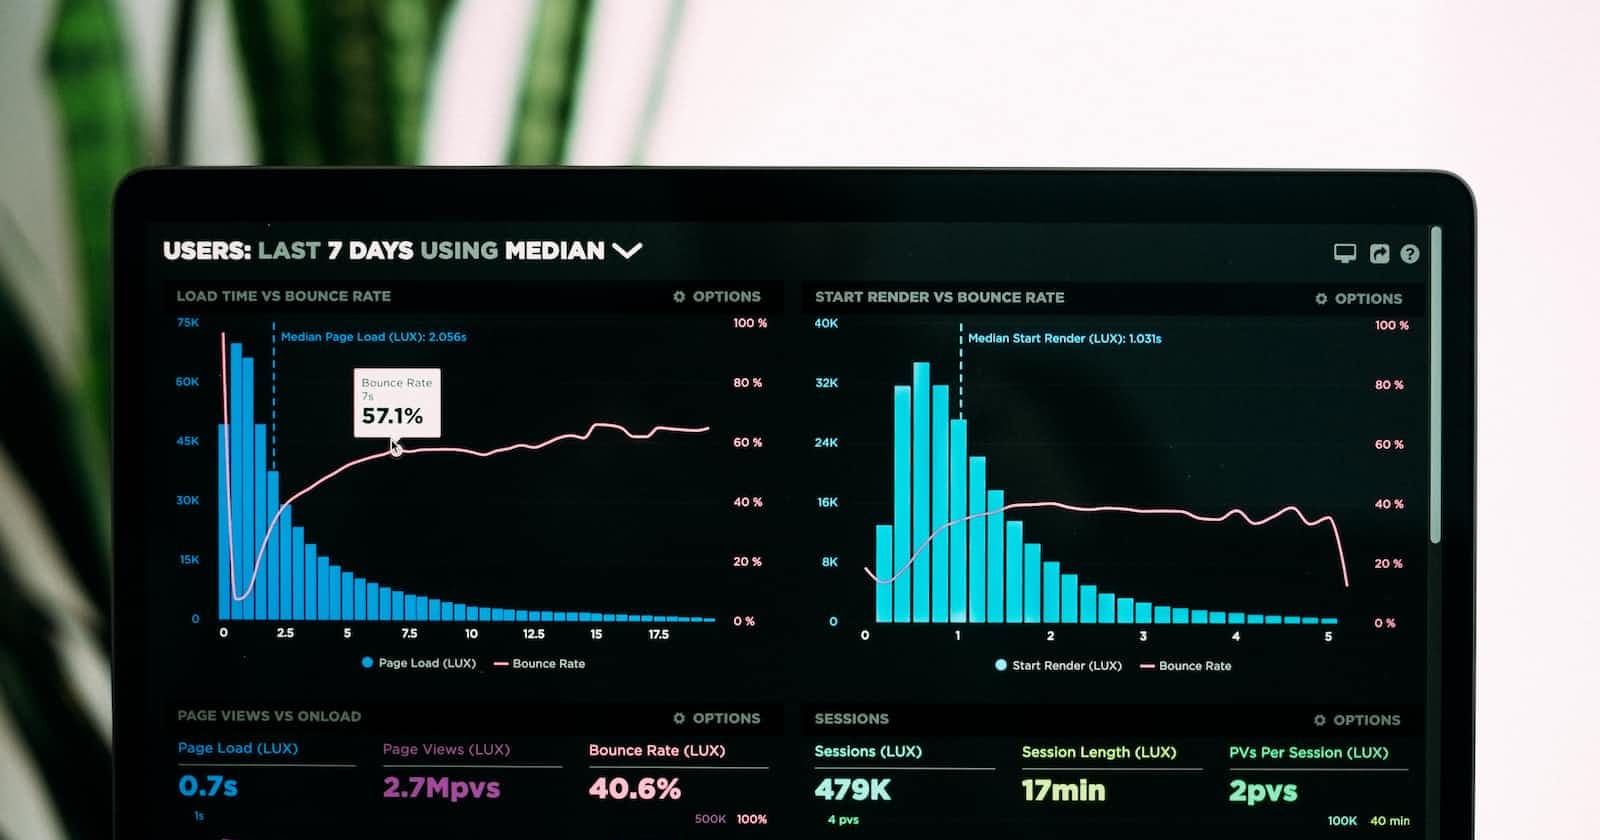 New Relic: Monitoring and Observability Tool